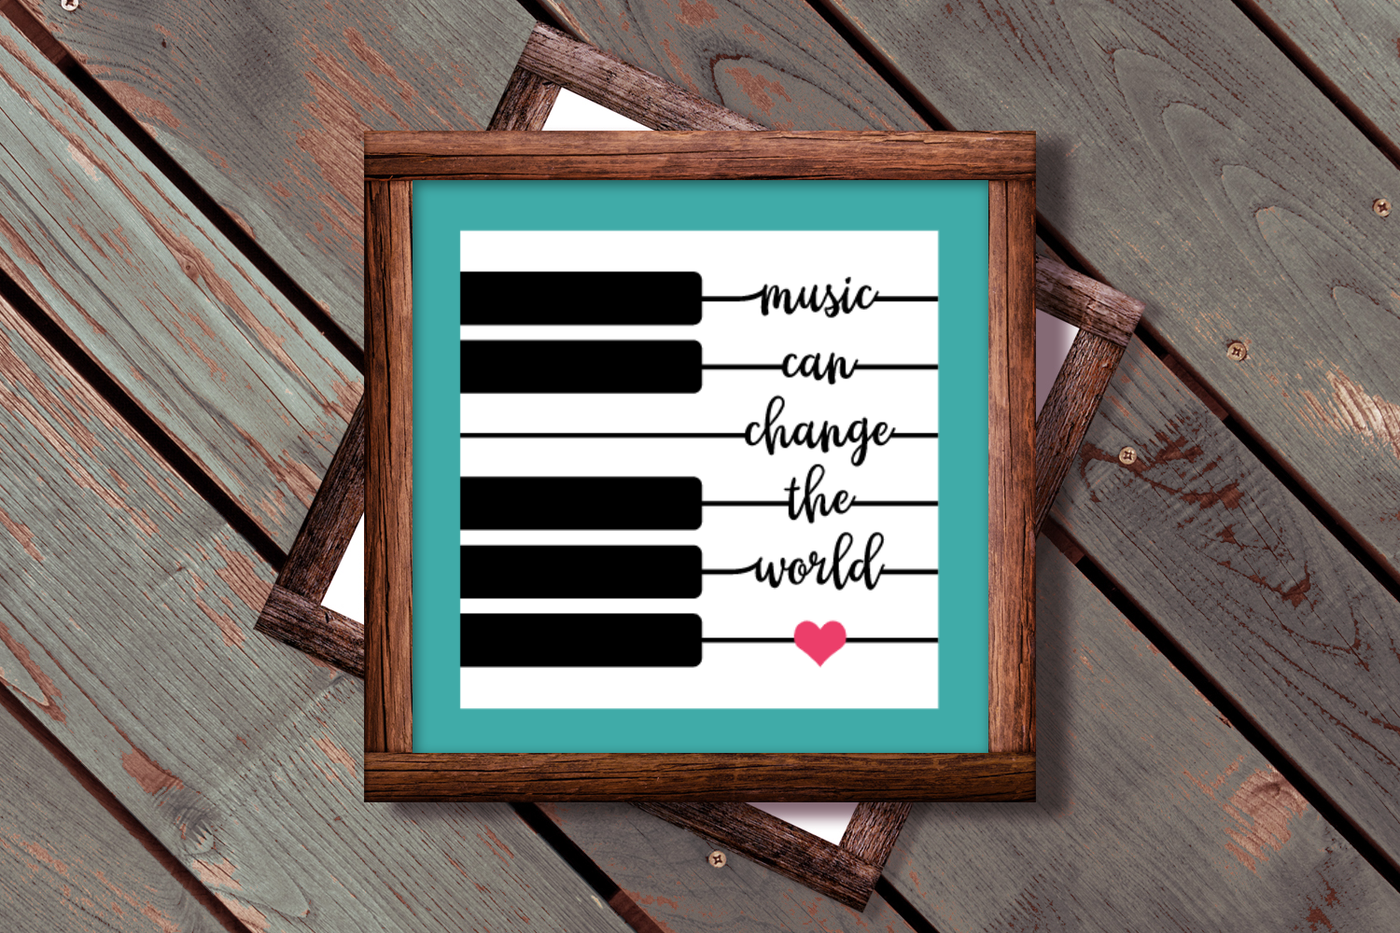 Piano key design that has the quote "music can change the world" and a heart incorporated into the white keys.